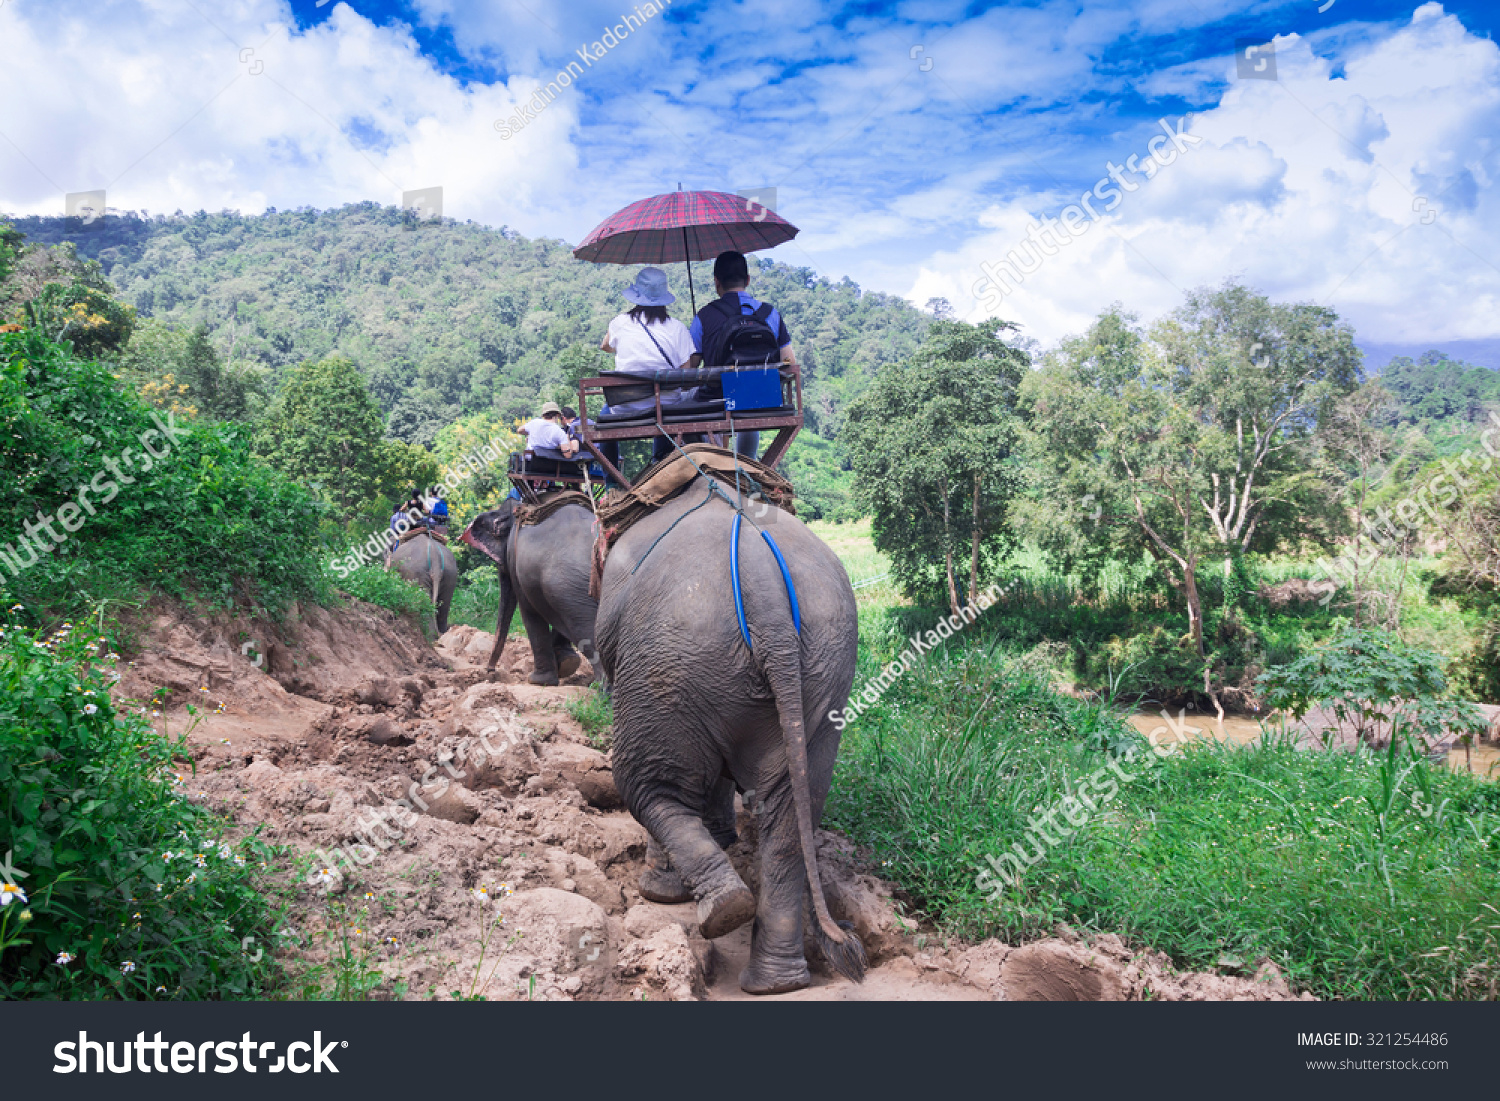 Group tourists to ride on an elephant in forest Chiang mai, Thailand #321254486